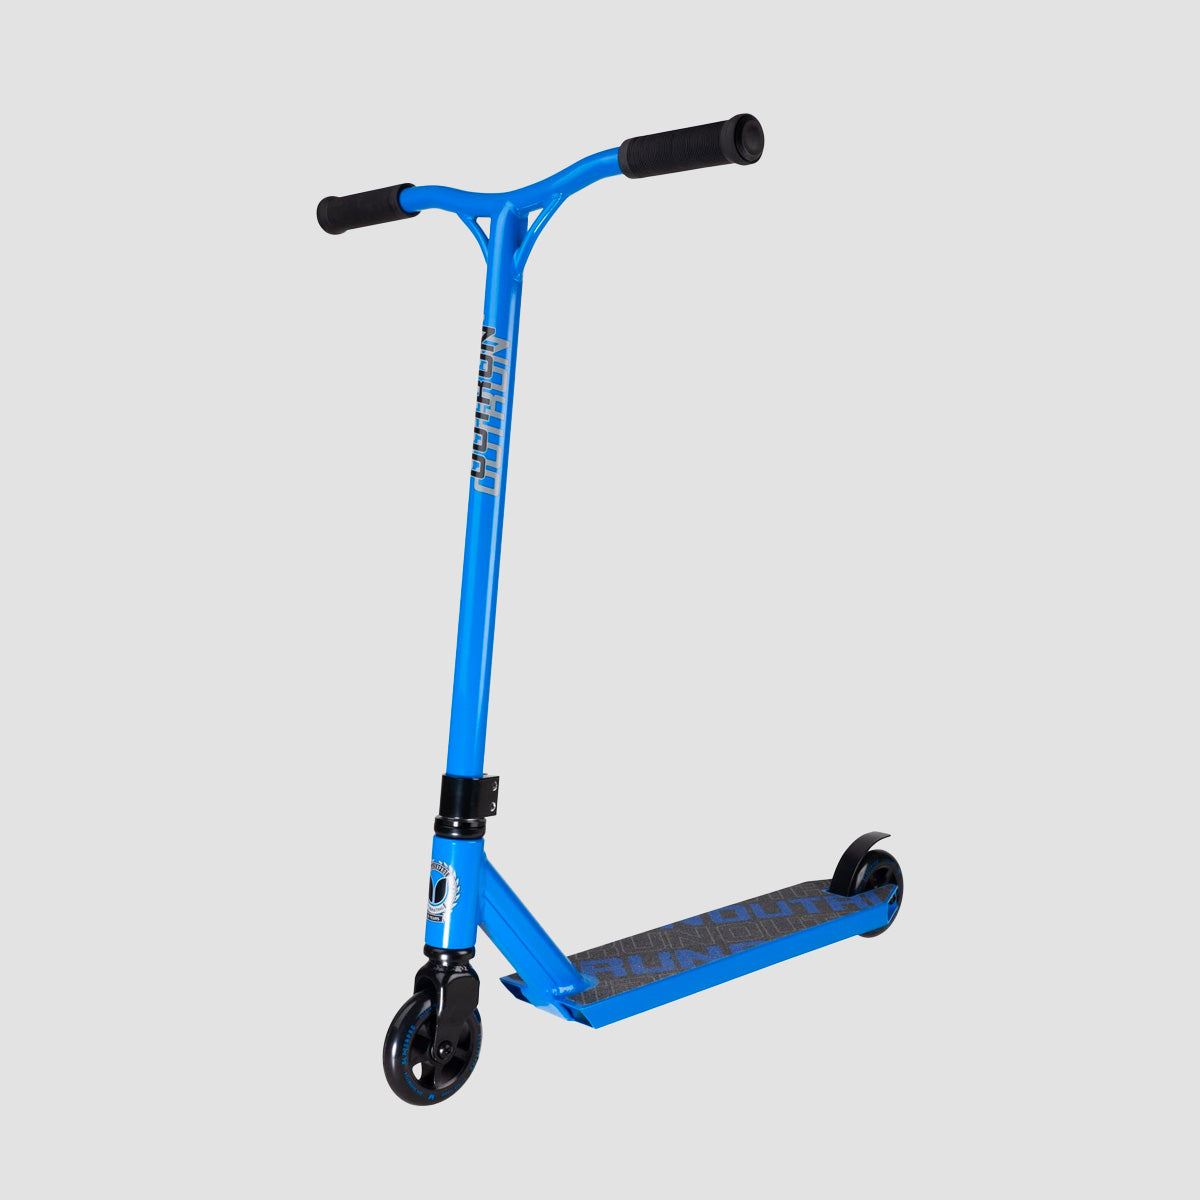 Blazer Pro Outrun 2 500mm Complete Scooter Blue